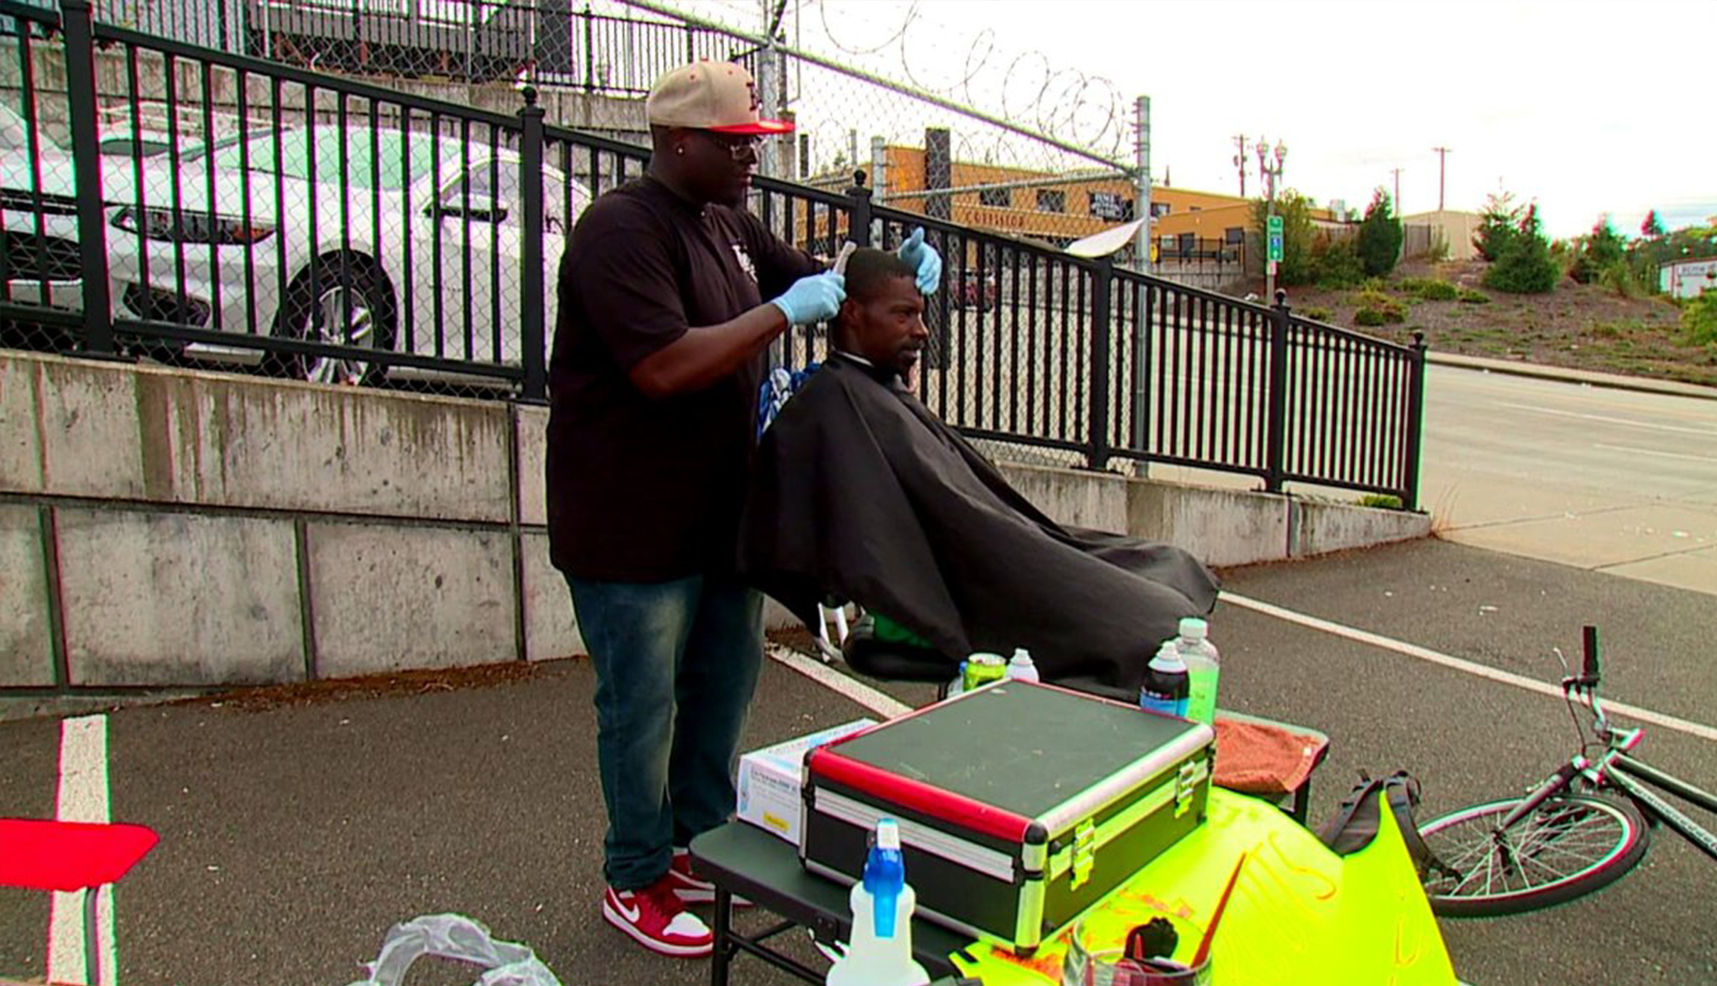 Driver On The Street: Tacoma Man Gives Free Haircuts To The Homeless